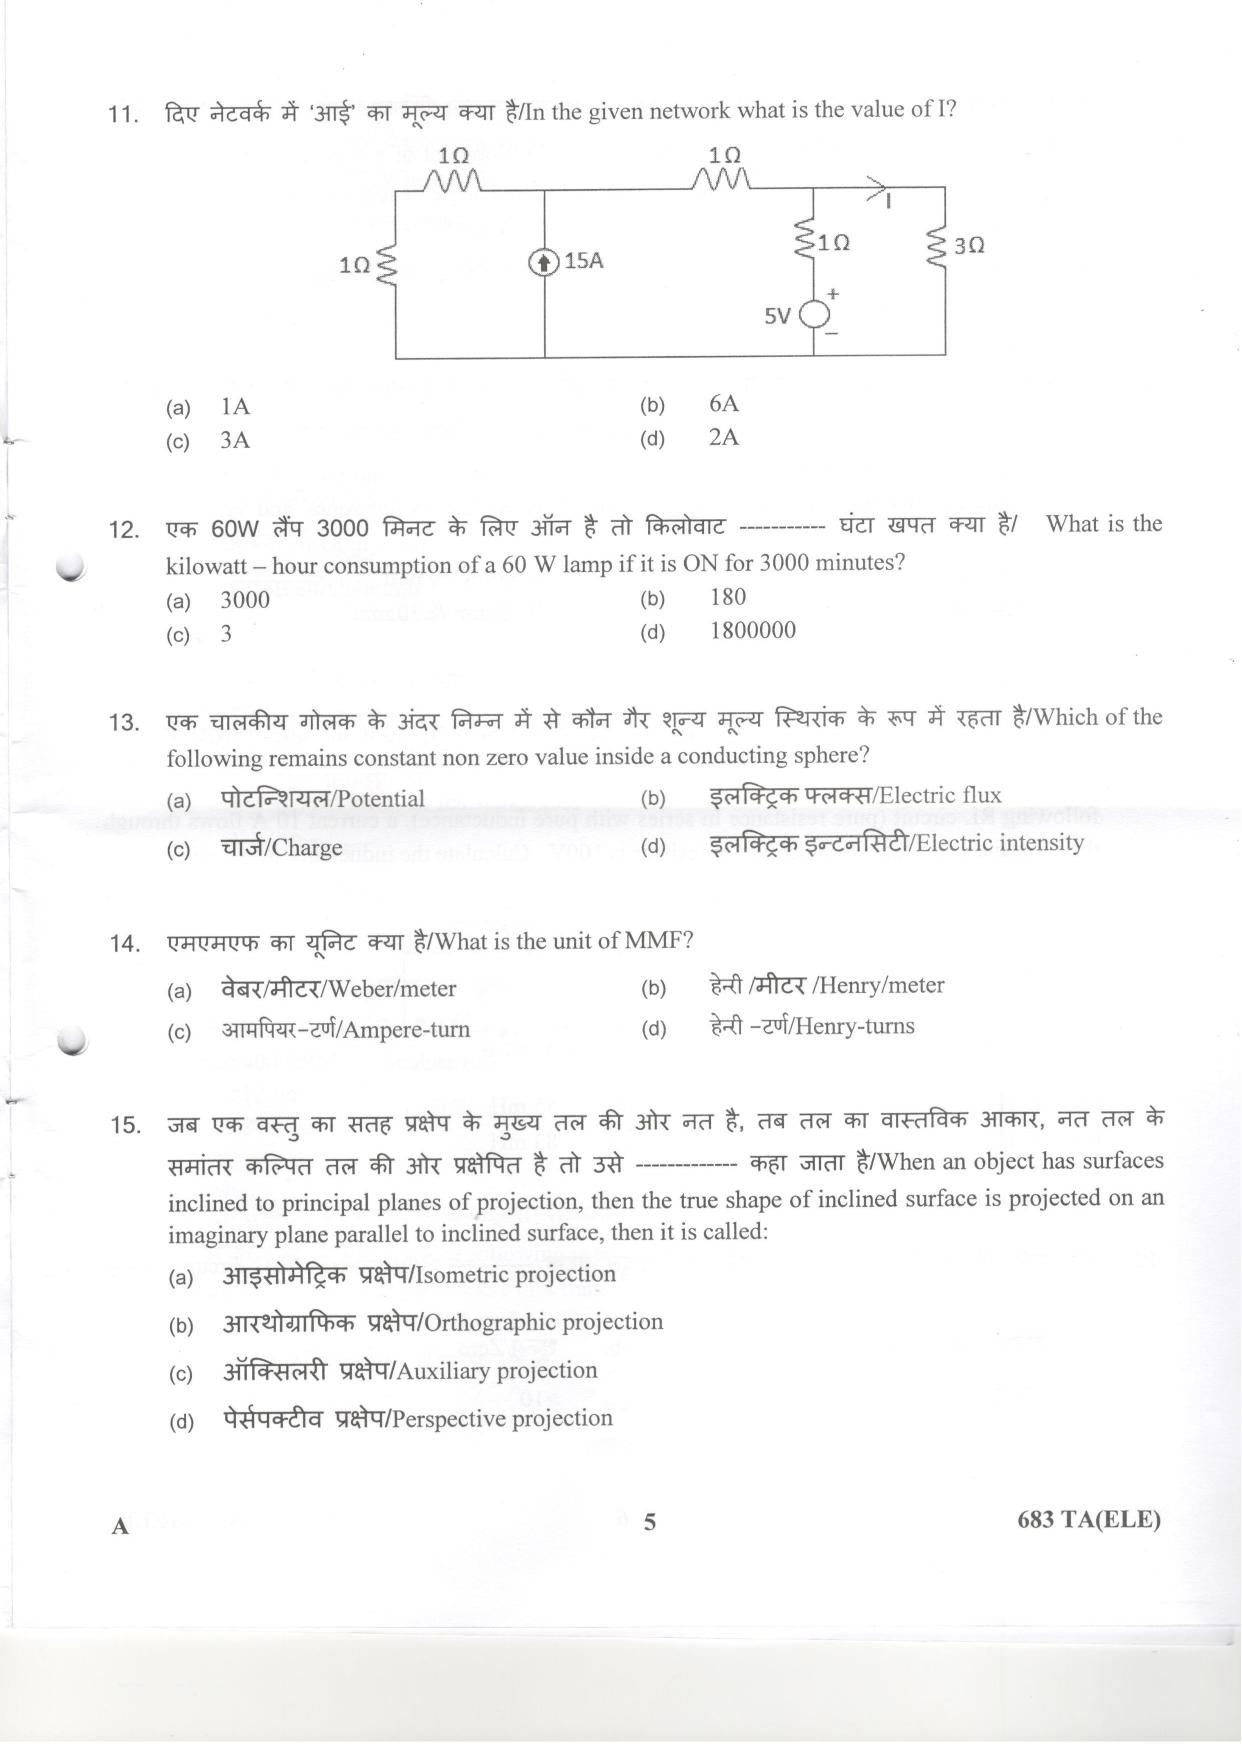 LPSC Technical Assistant (Electrical) 2018 Question Paper - Page 5